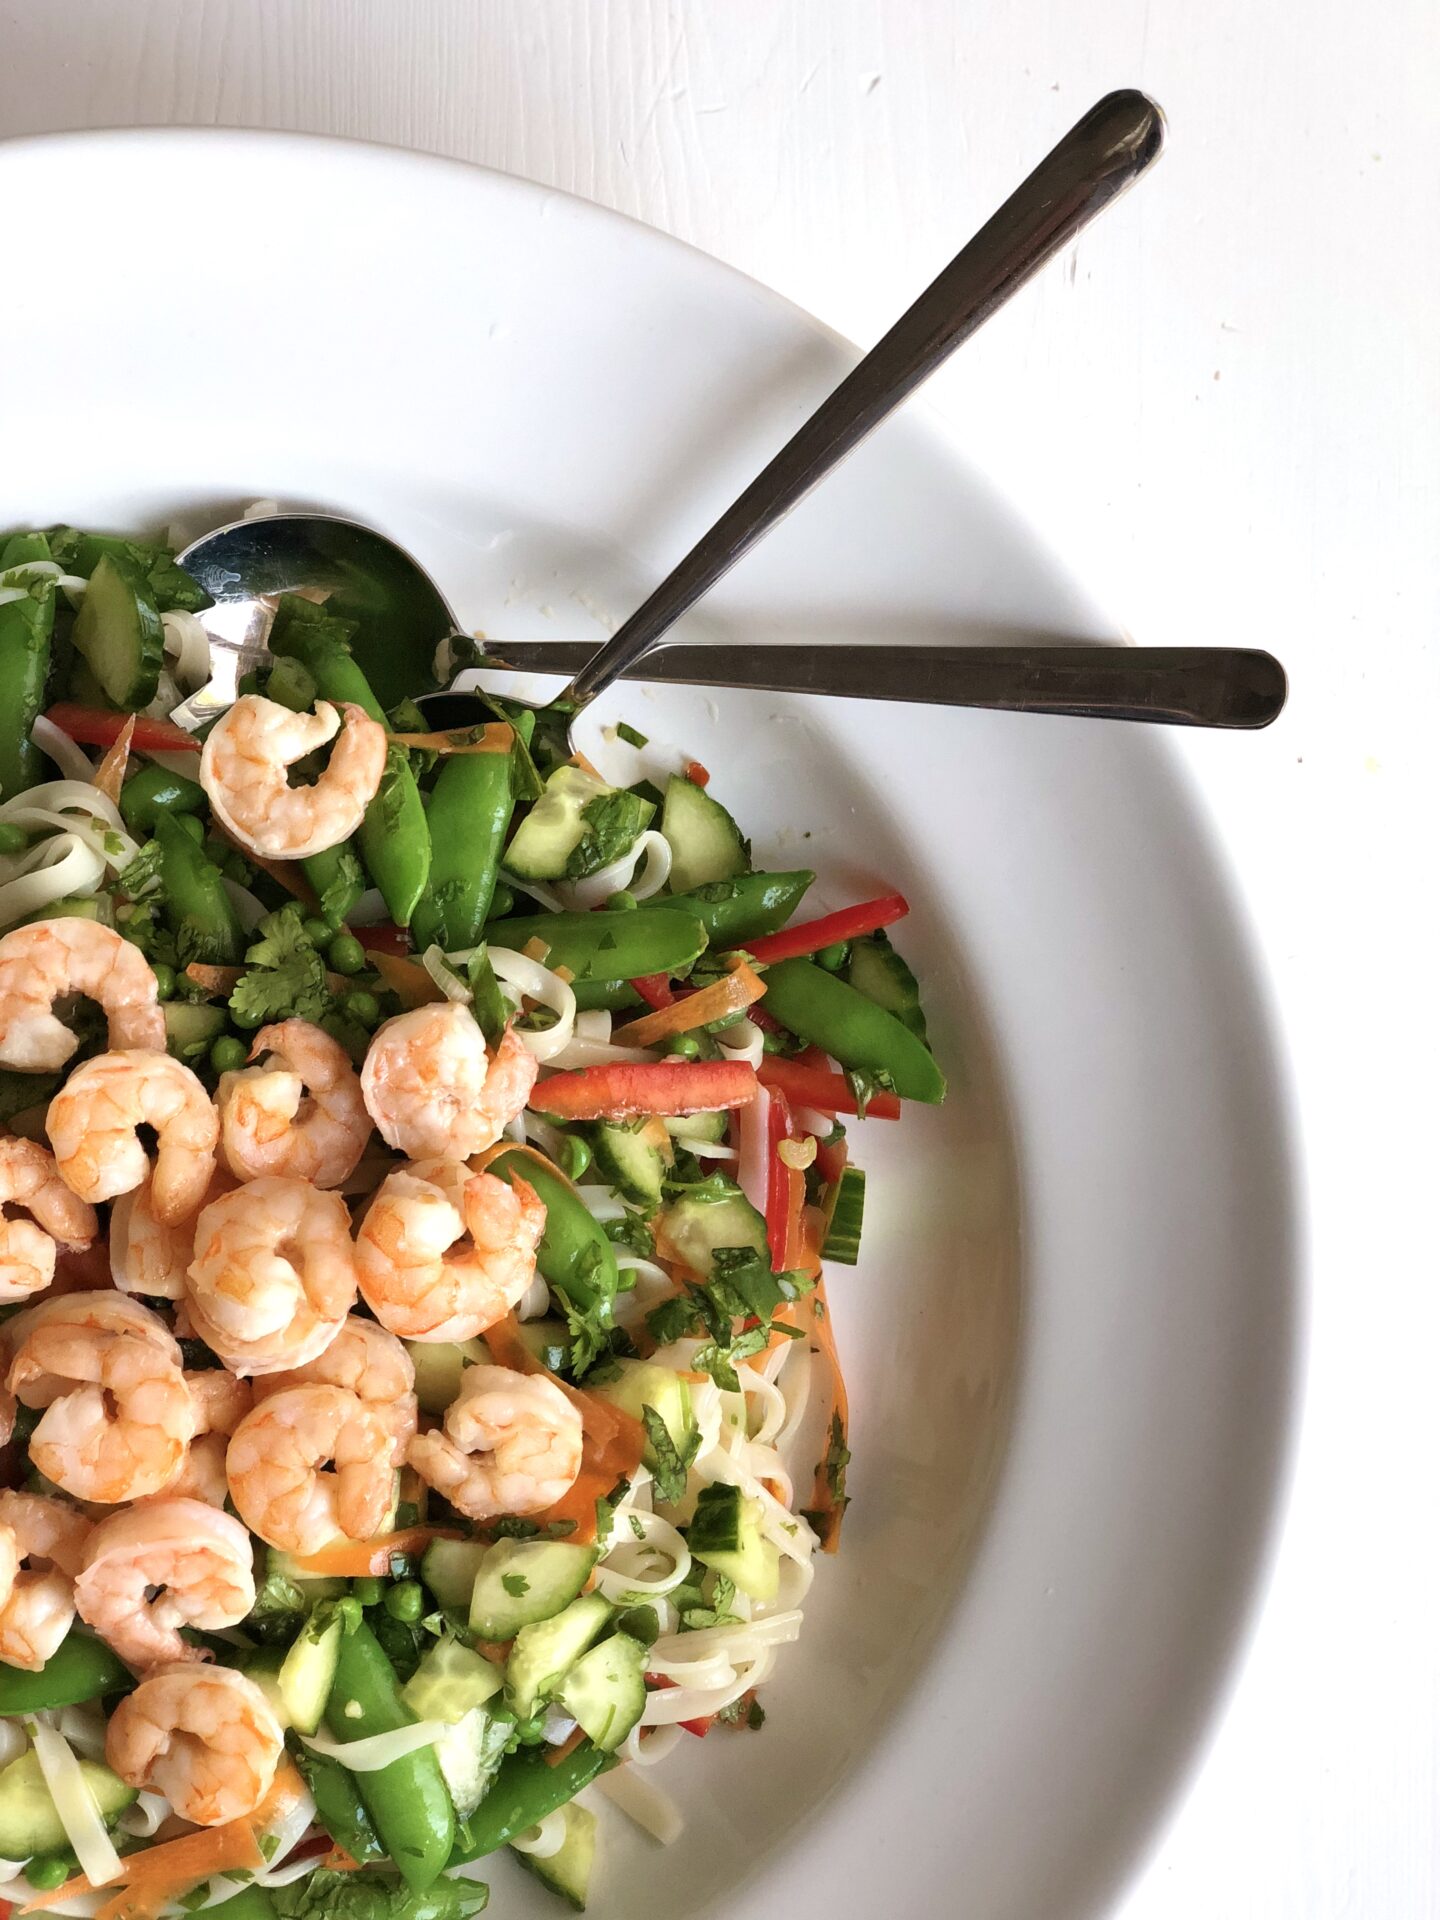 Thai noodle salad with vegetables, fresh herbs and roasted shrimp seen from above